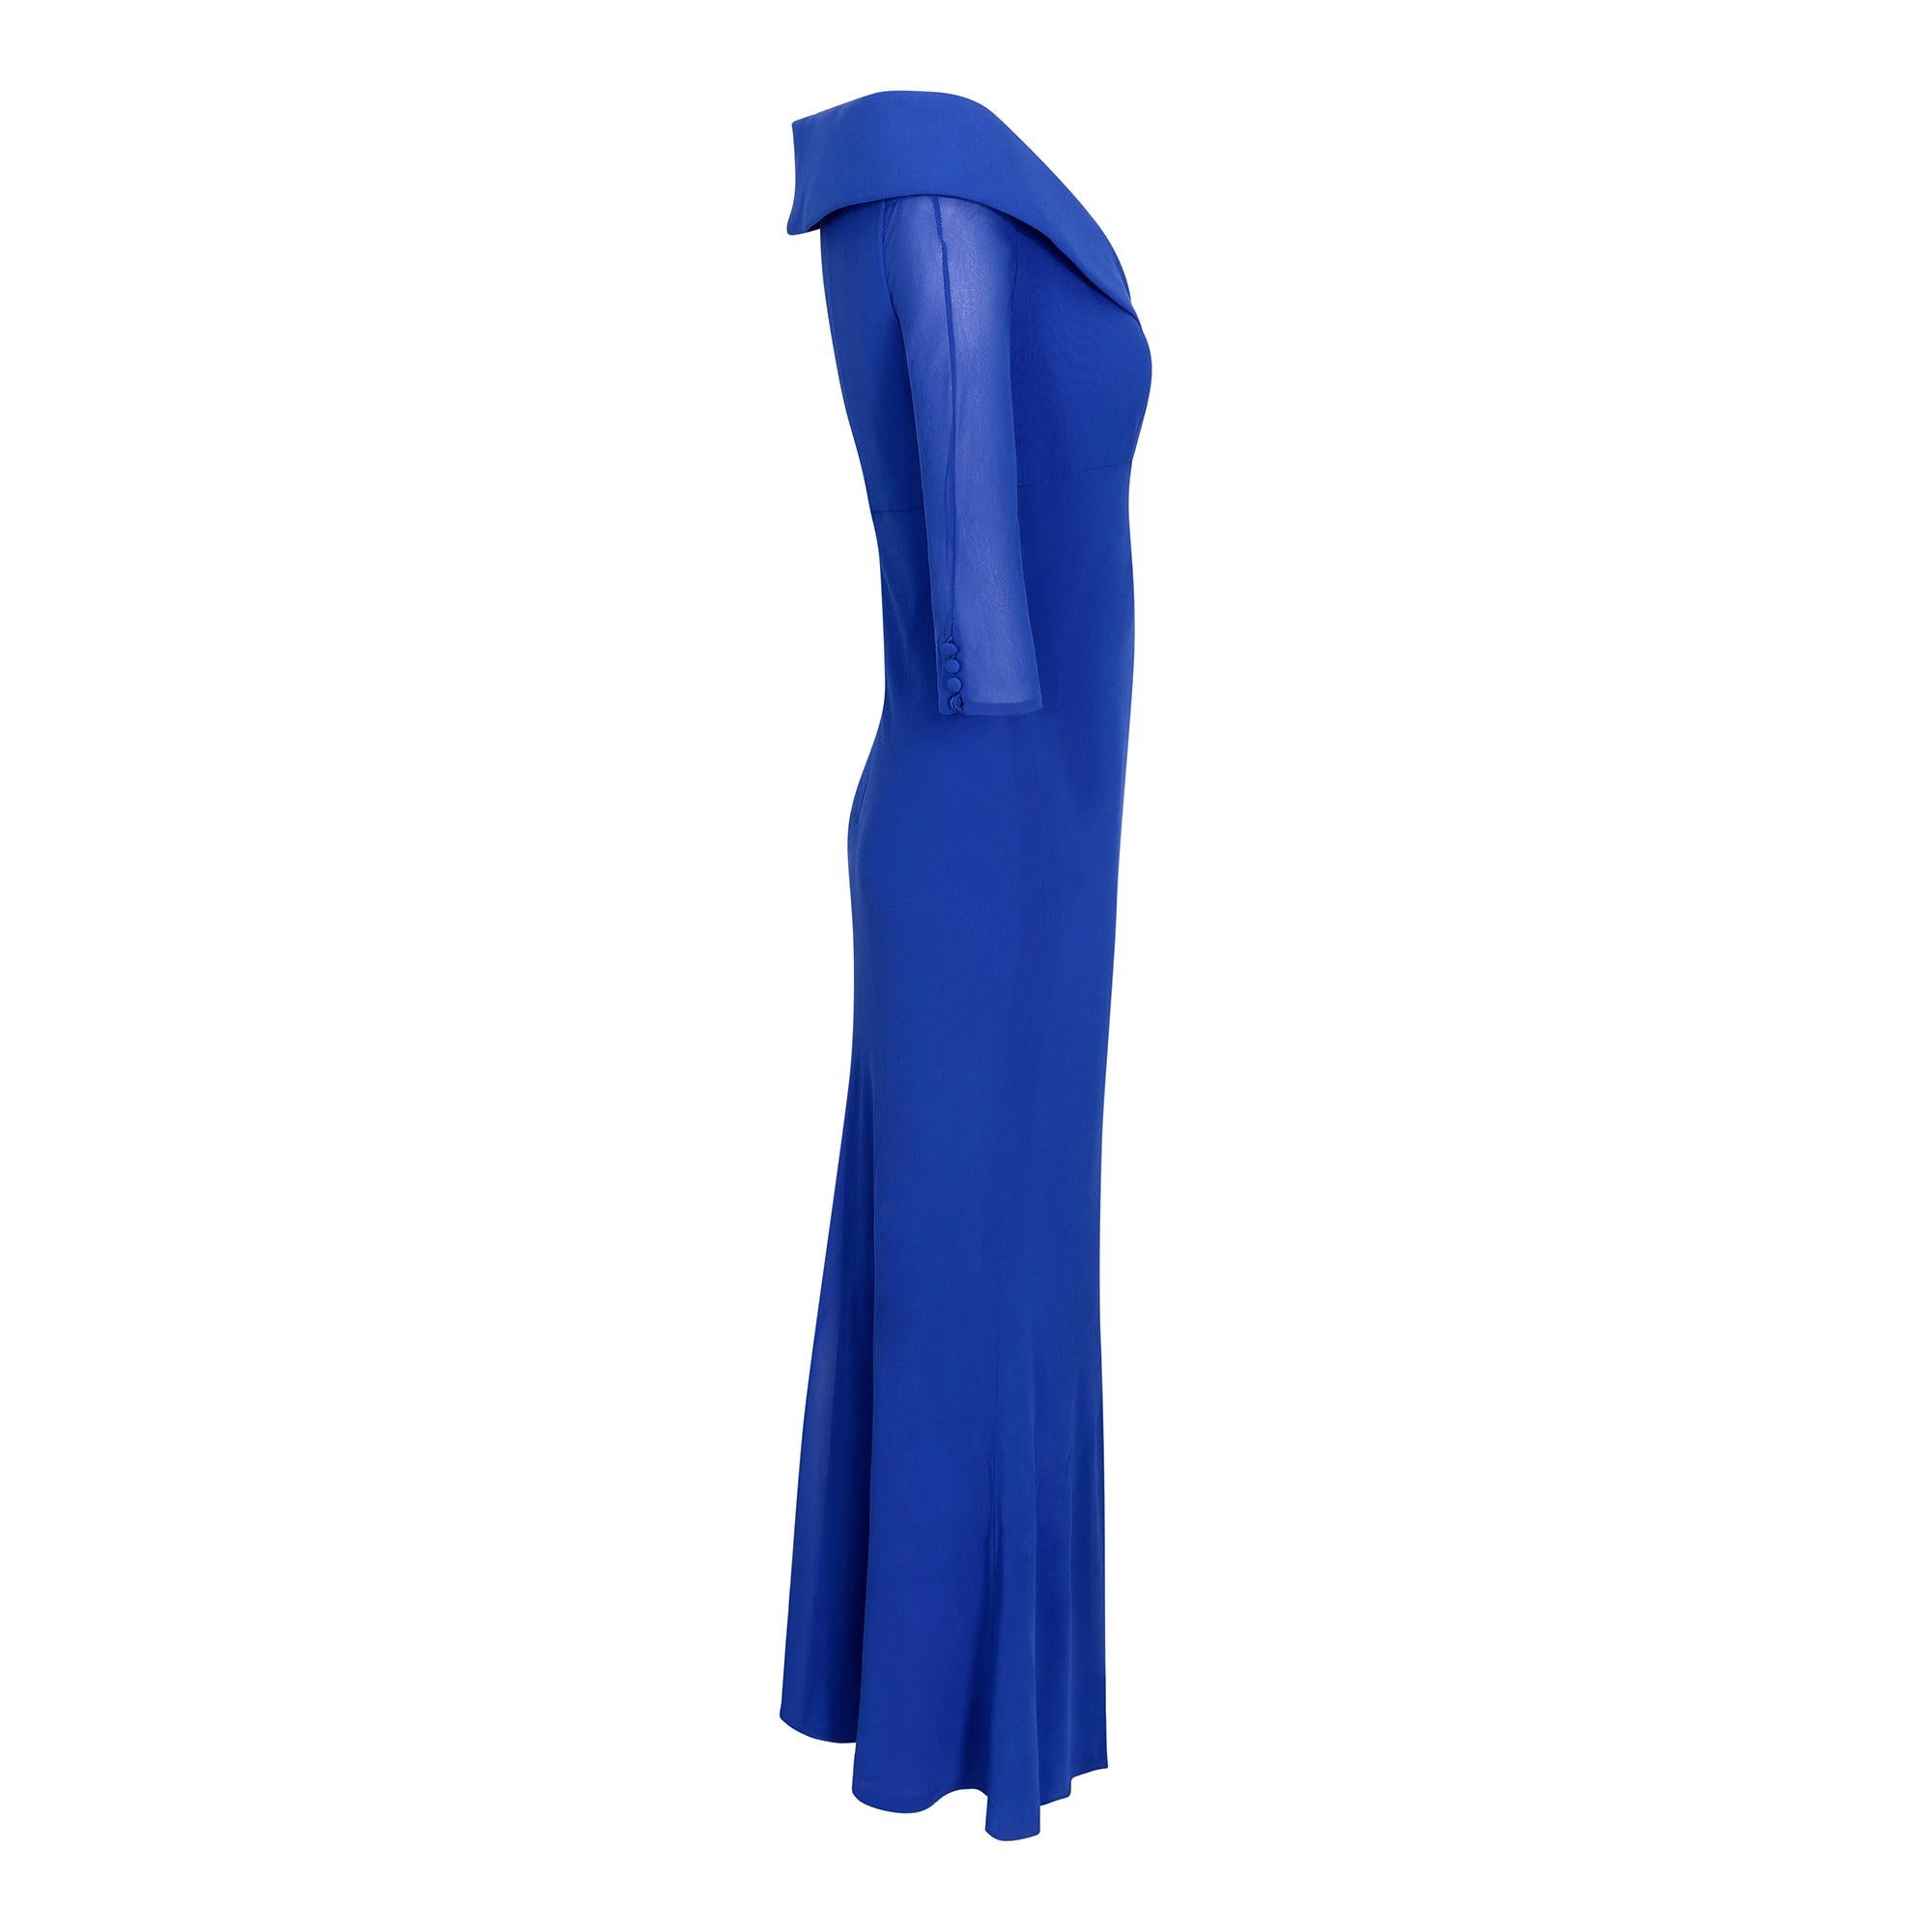 A couture contemporary dress , circa 2010 from Bruce Oldfield, a celebrated UK designer who is in his fifth decade of exclusive design. He is renowned for his occasion wear and this is a beautiful and understated example in royal blue silk chiffon